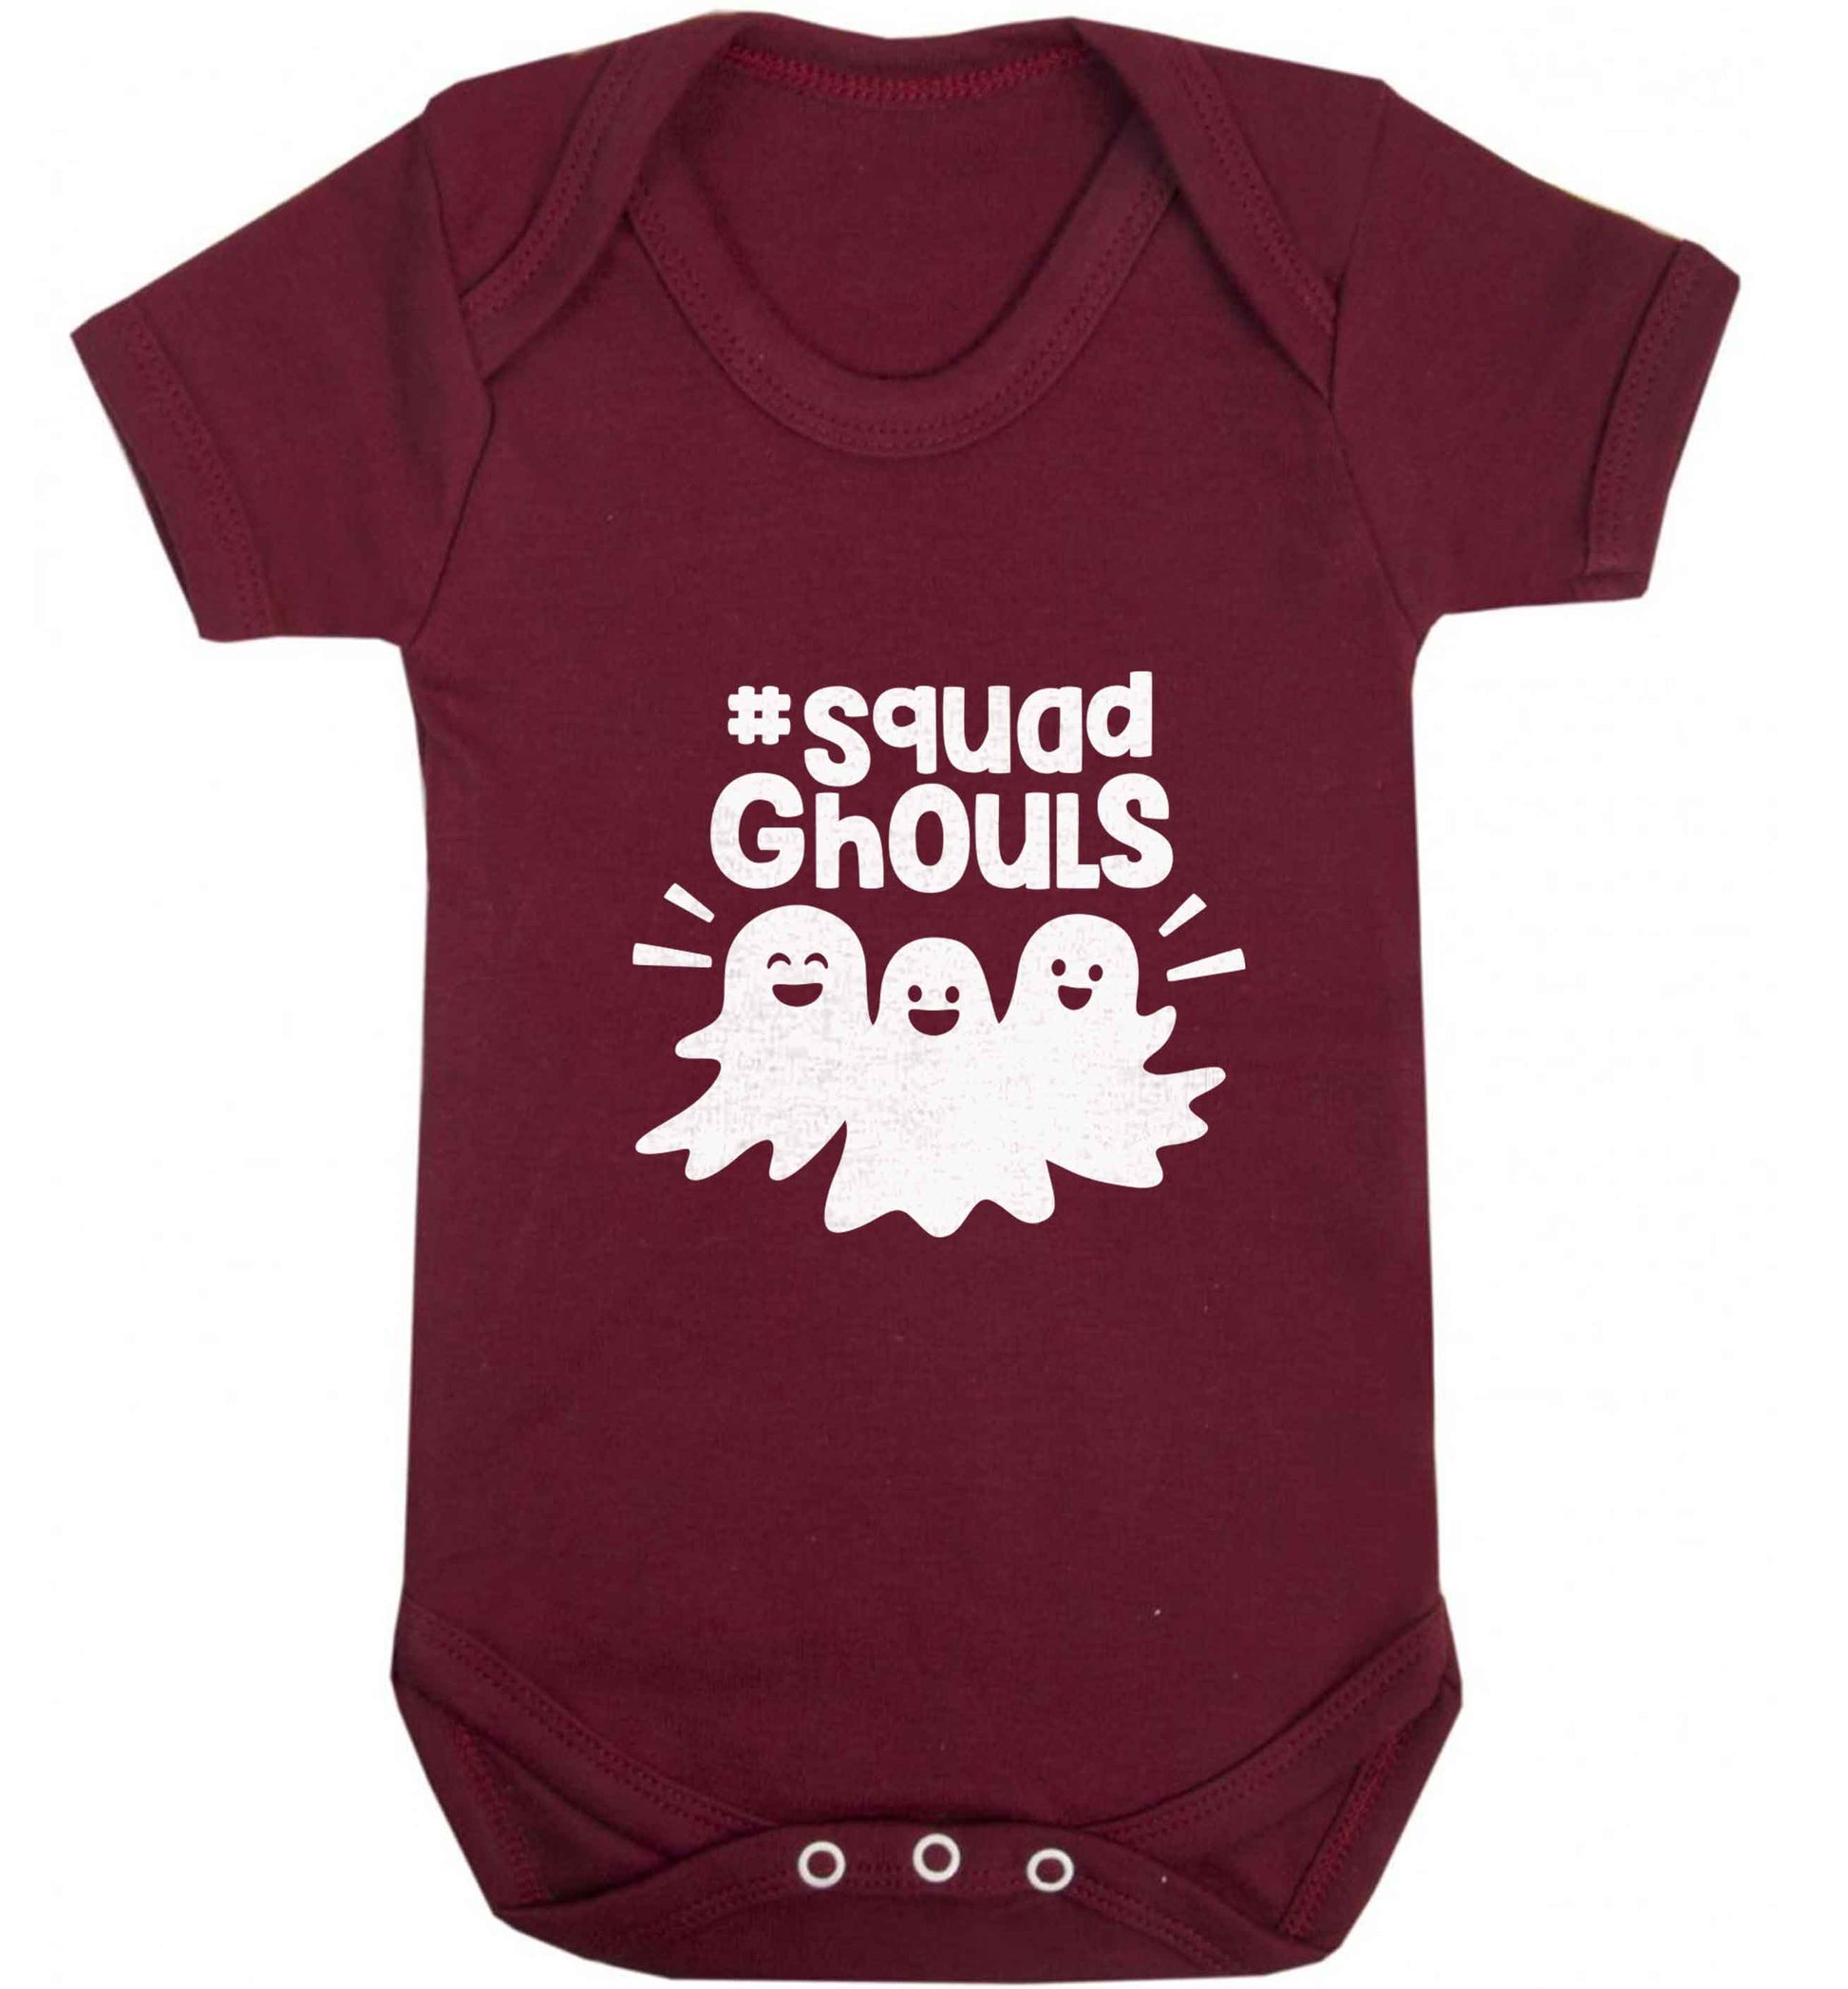 Squad ghouls Kit baby vest maroon 18-24 months